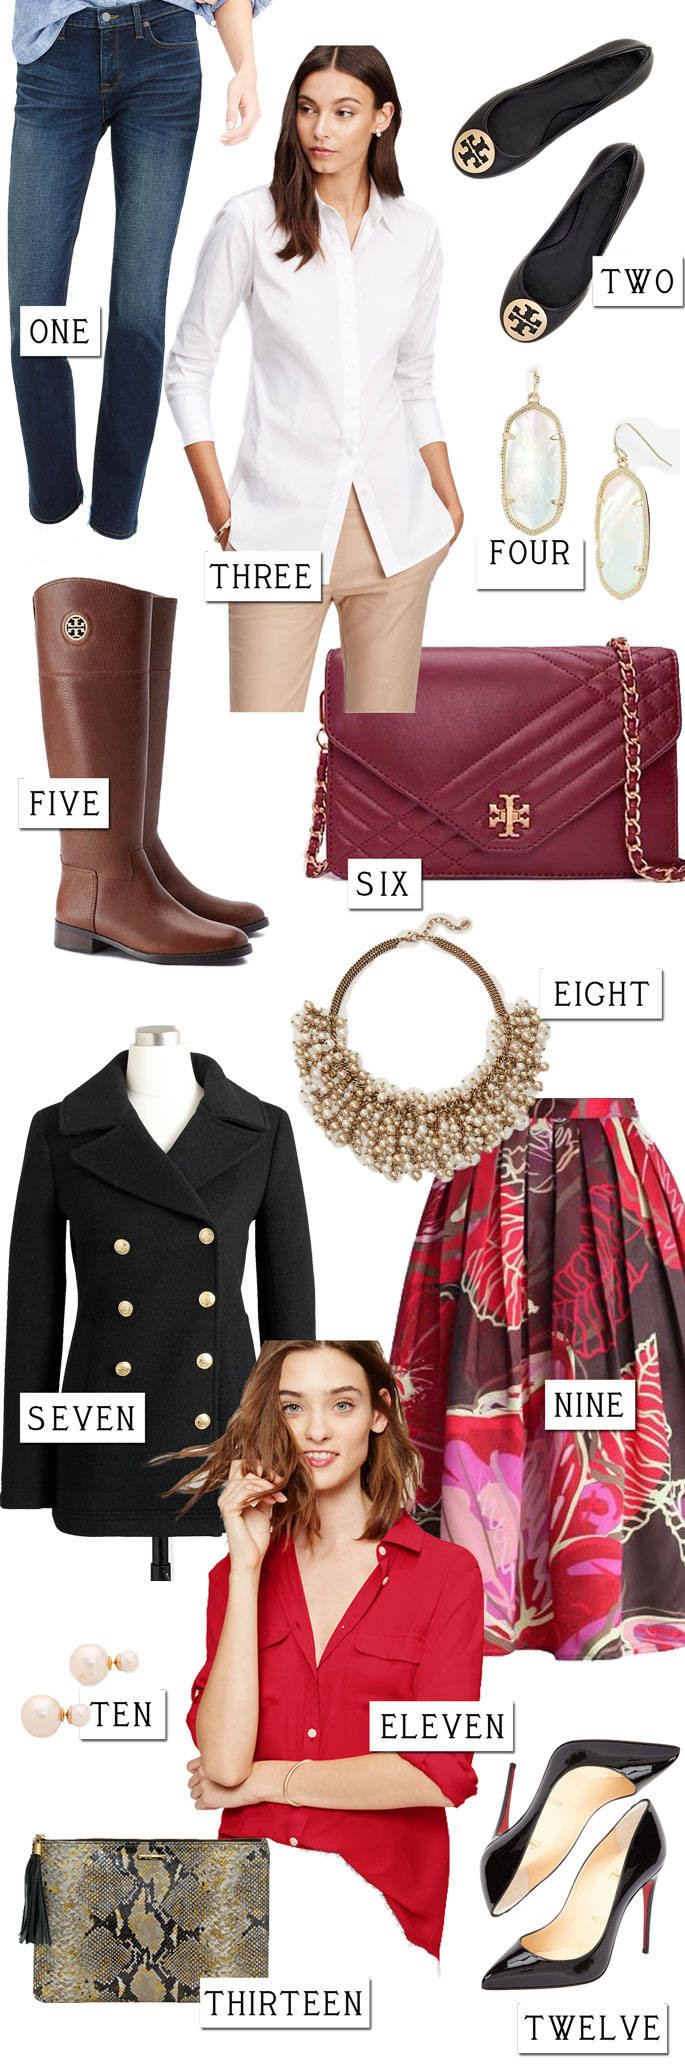 Christmas Party Outfit Ideas 2015
 Holiday Party Outfit Inspiration